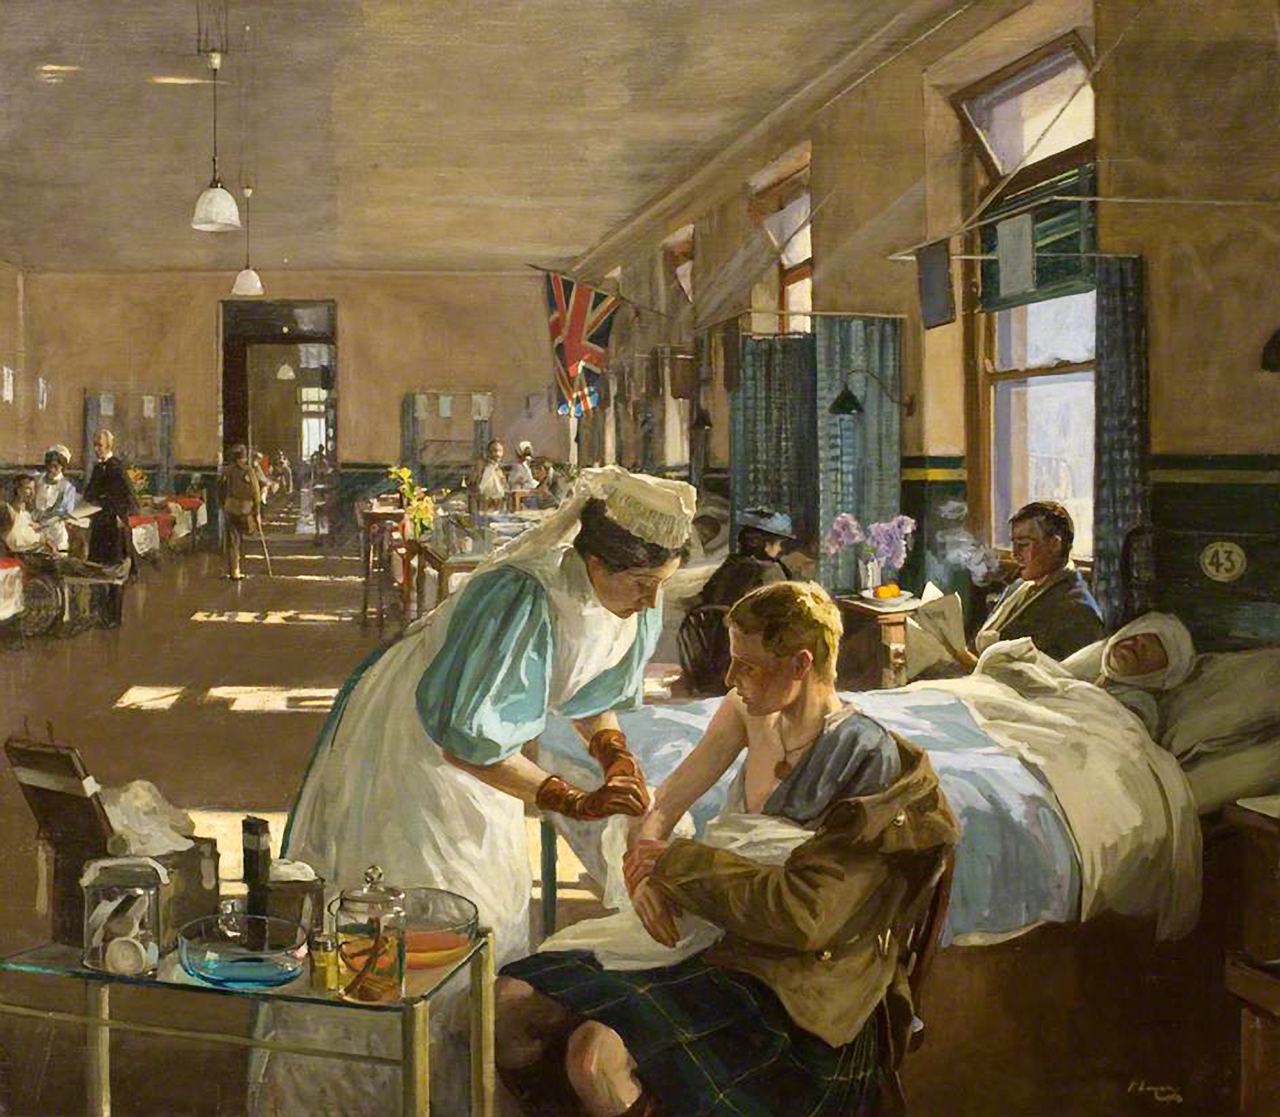 A nurse attending to a wounded soldier in a hospital room filled with other nurses and injured soldiers